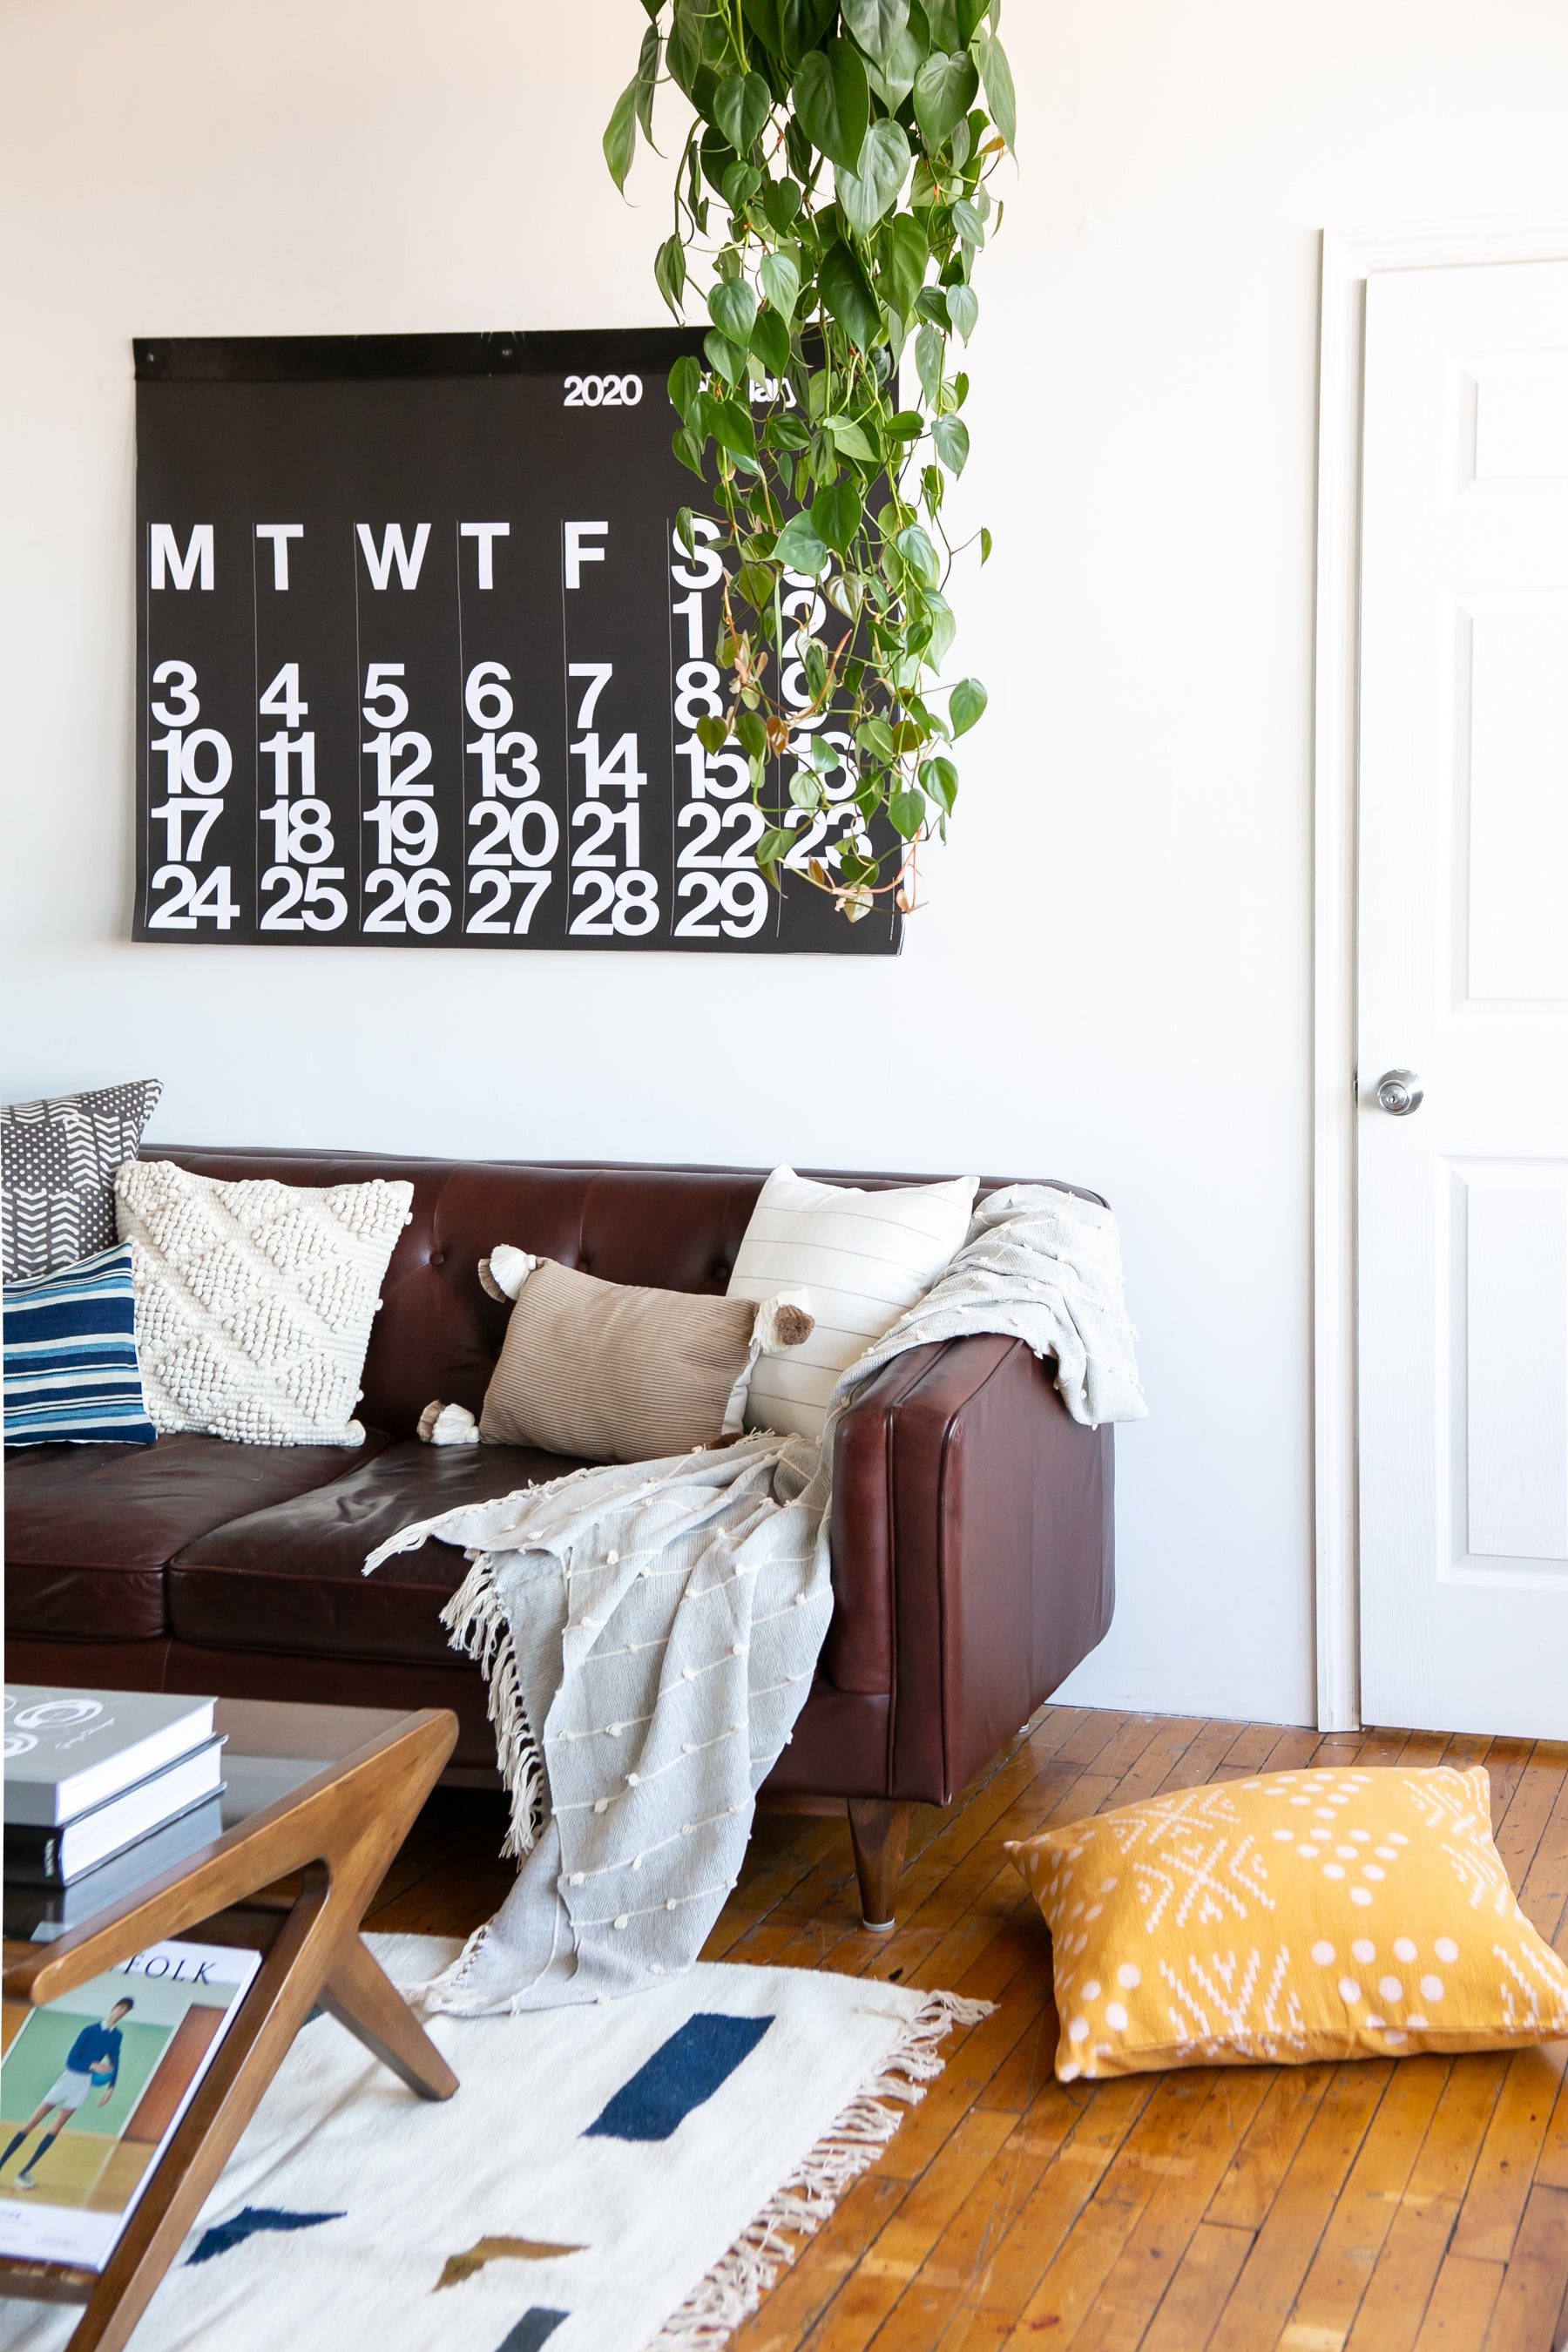 4 Easy Steps to Start Curating Your Wall Decor - Sigrid & Co.